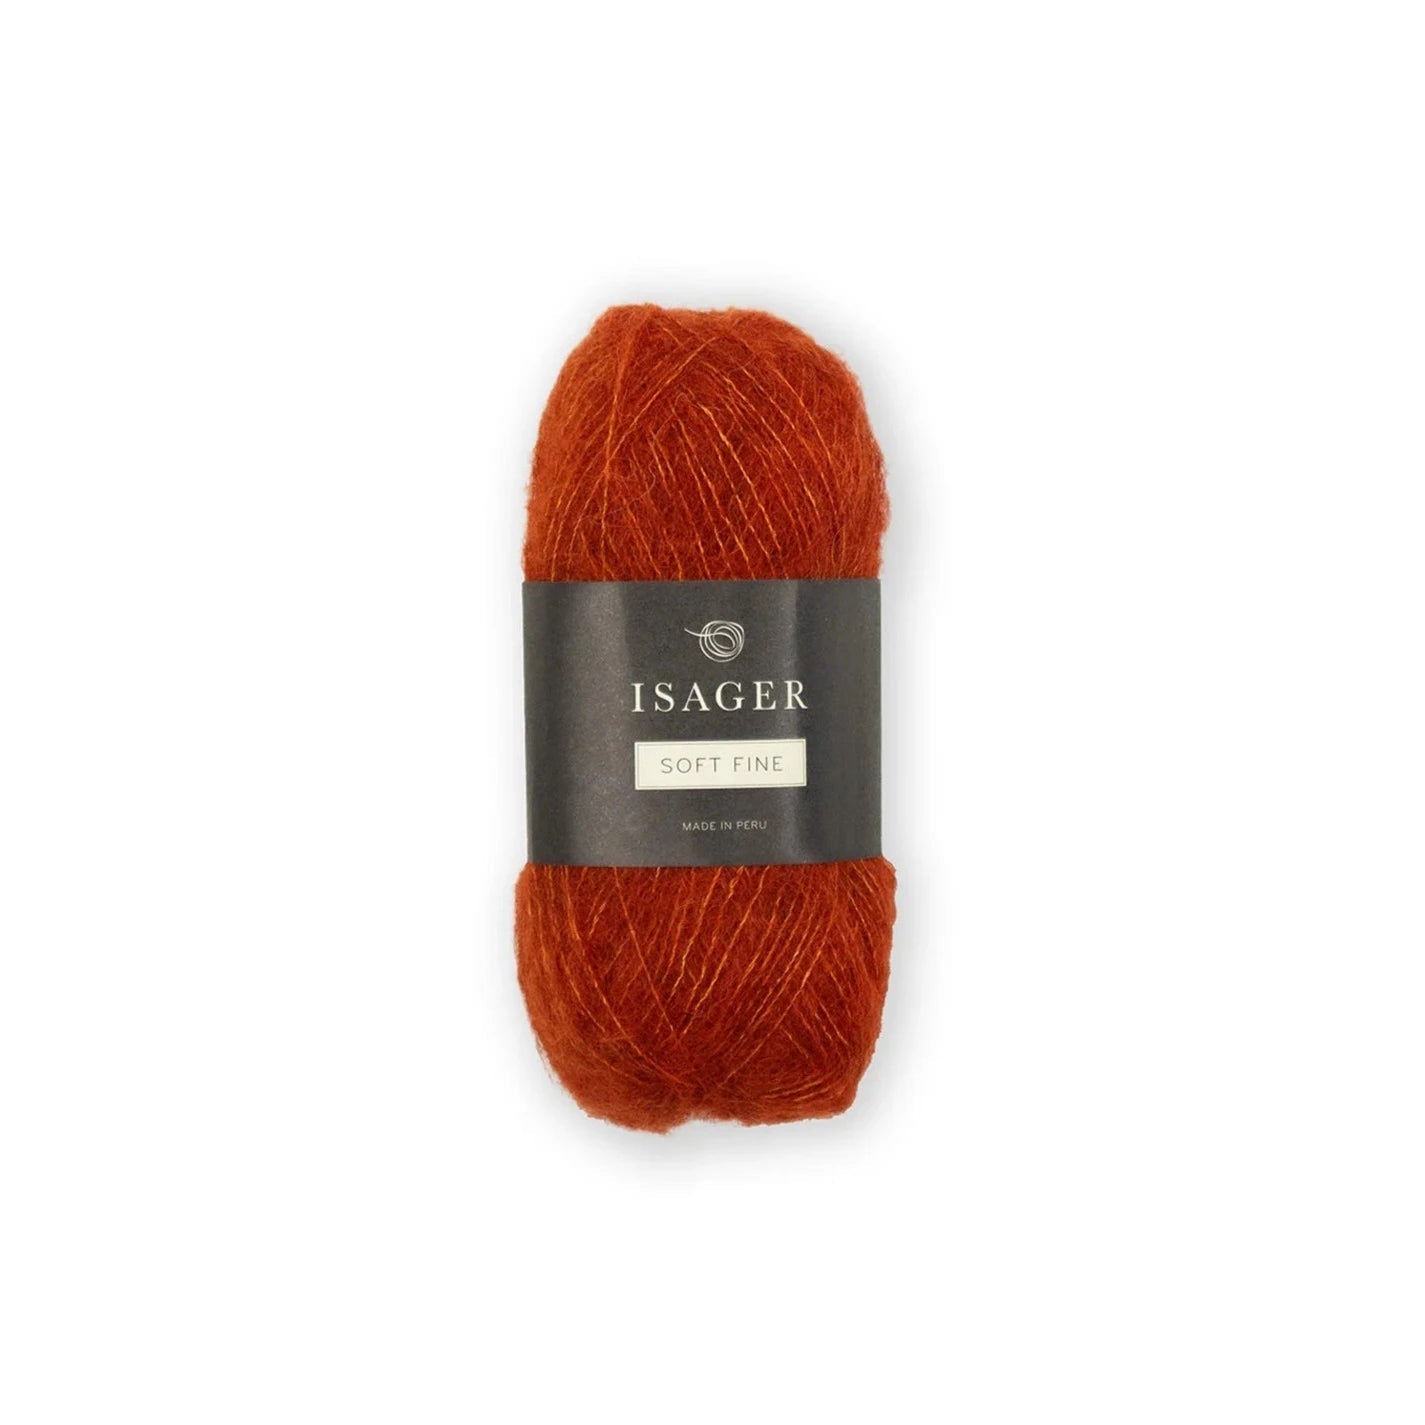 Isager Soft Fine - Isager - 28 - The Little Yarn Store